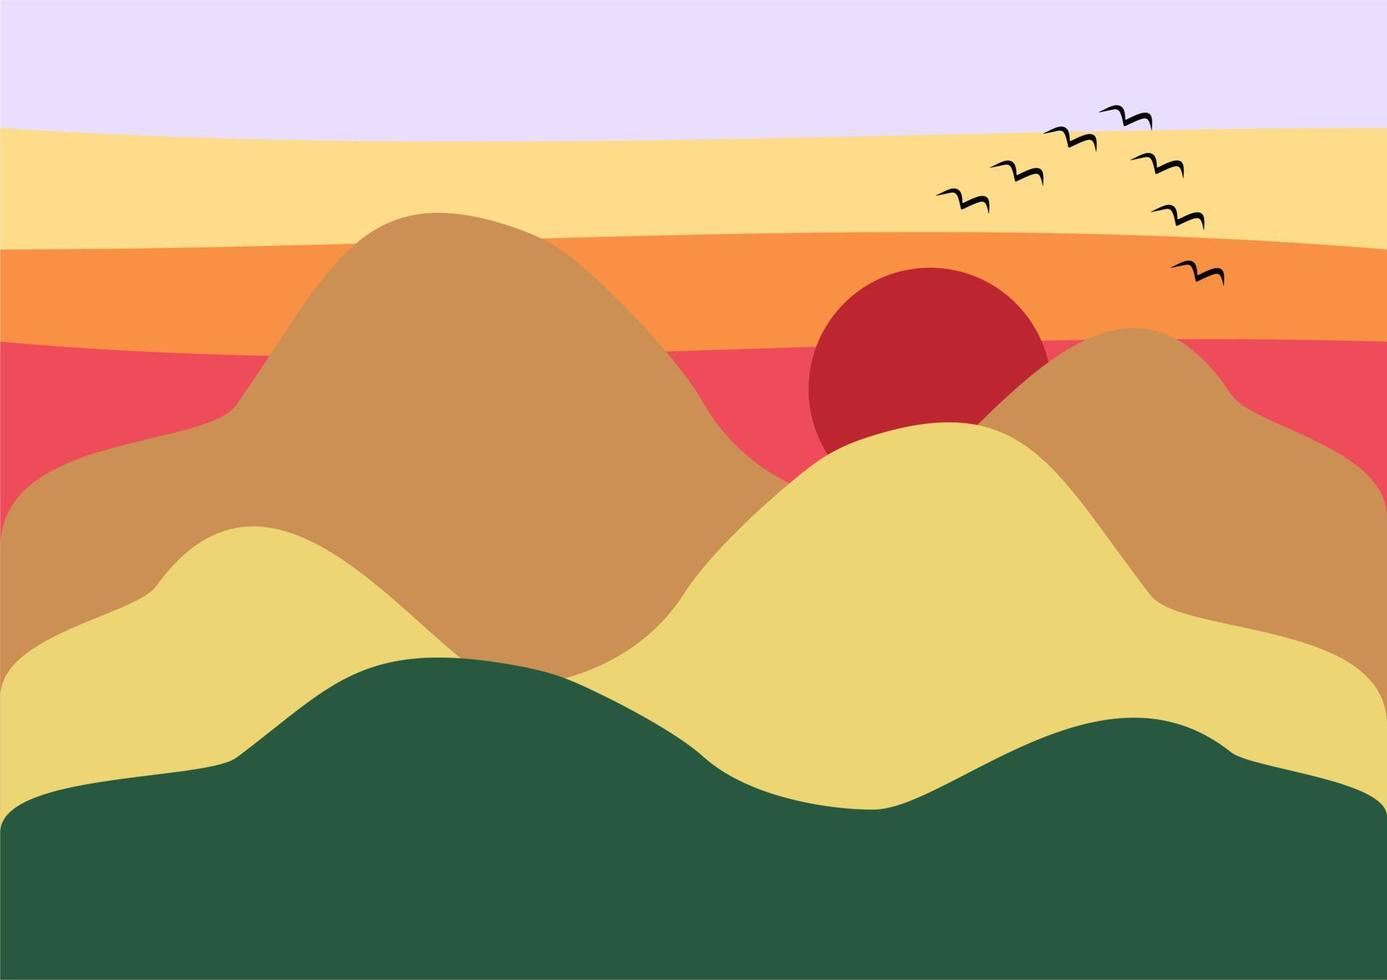 Japanese mountains and sunlight with birds. Colorful landscape. vector